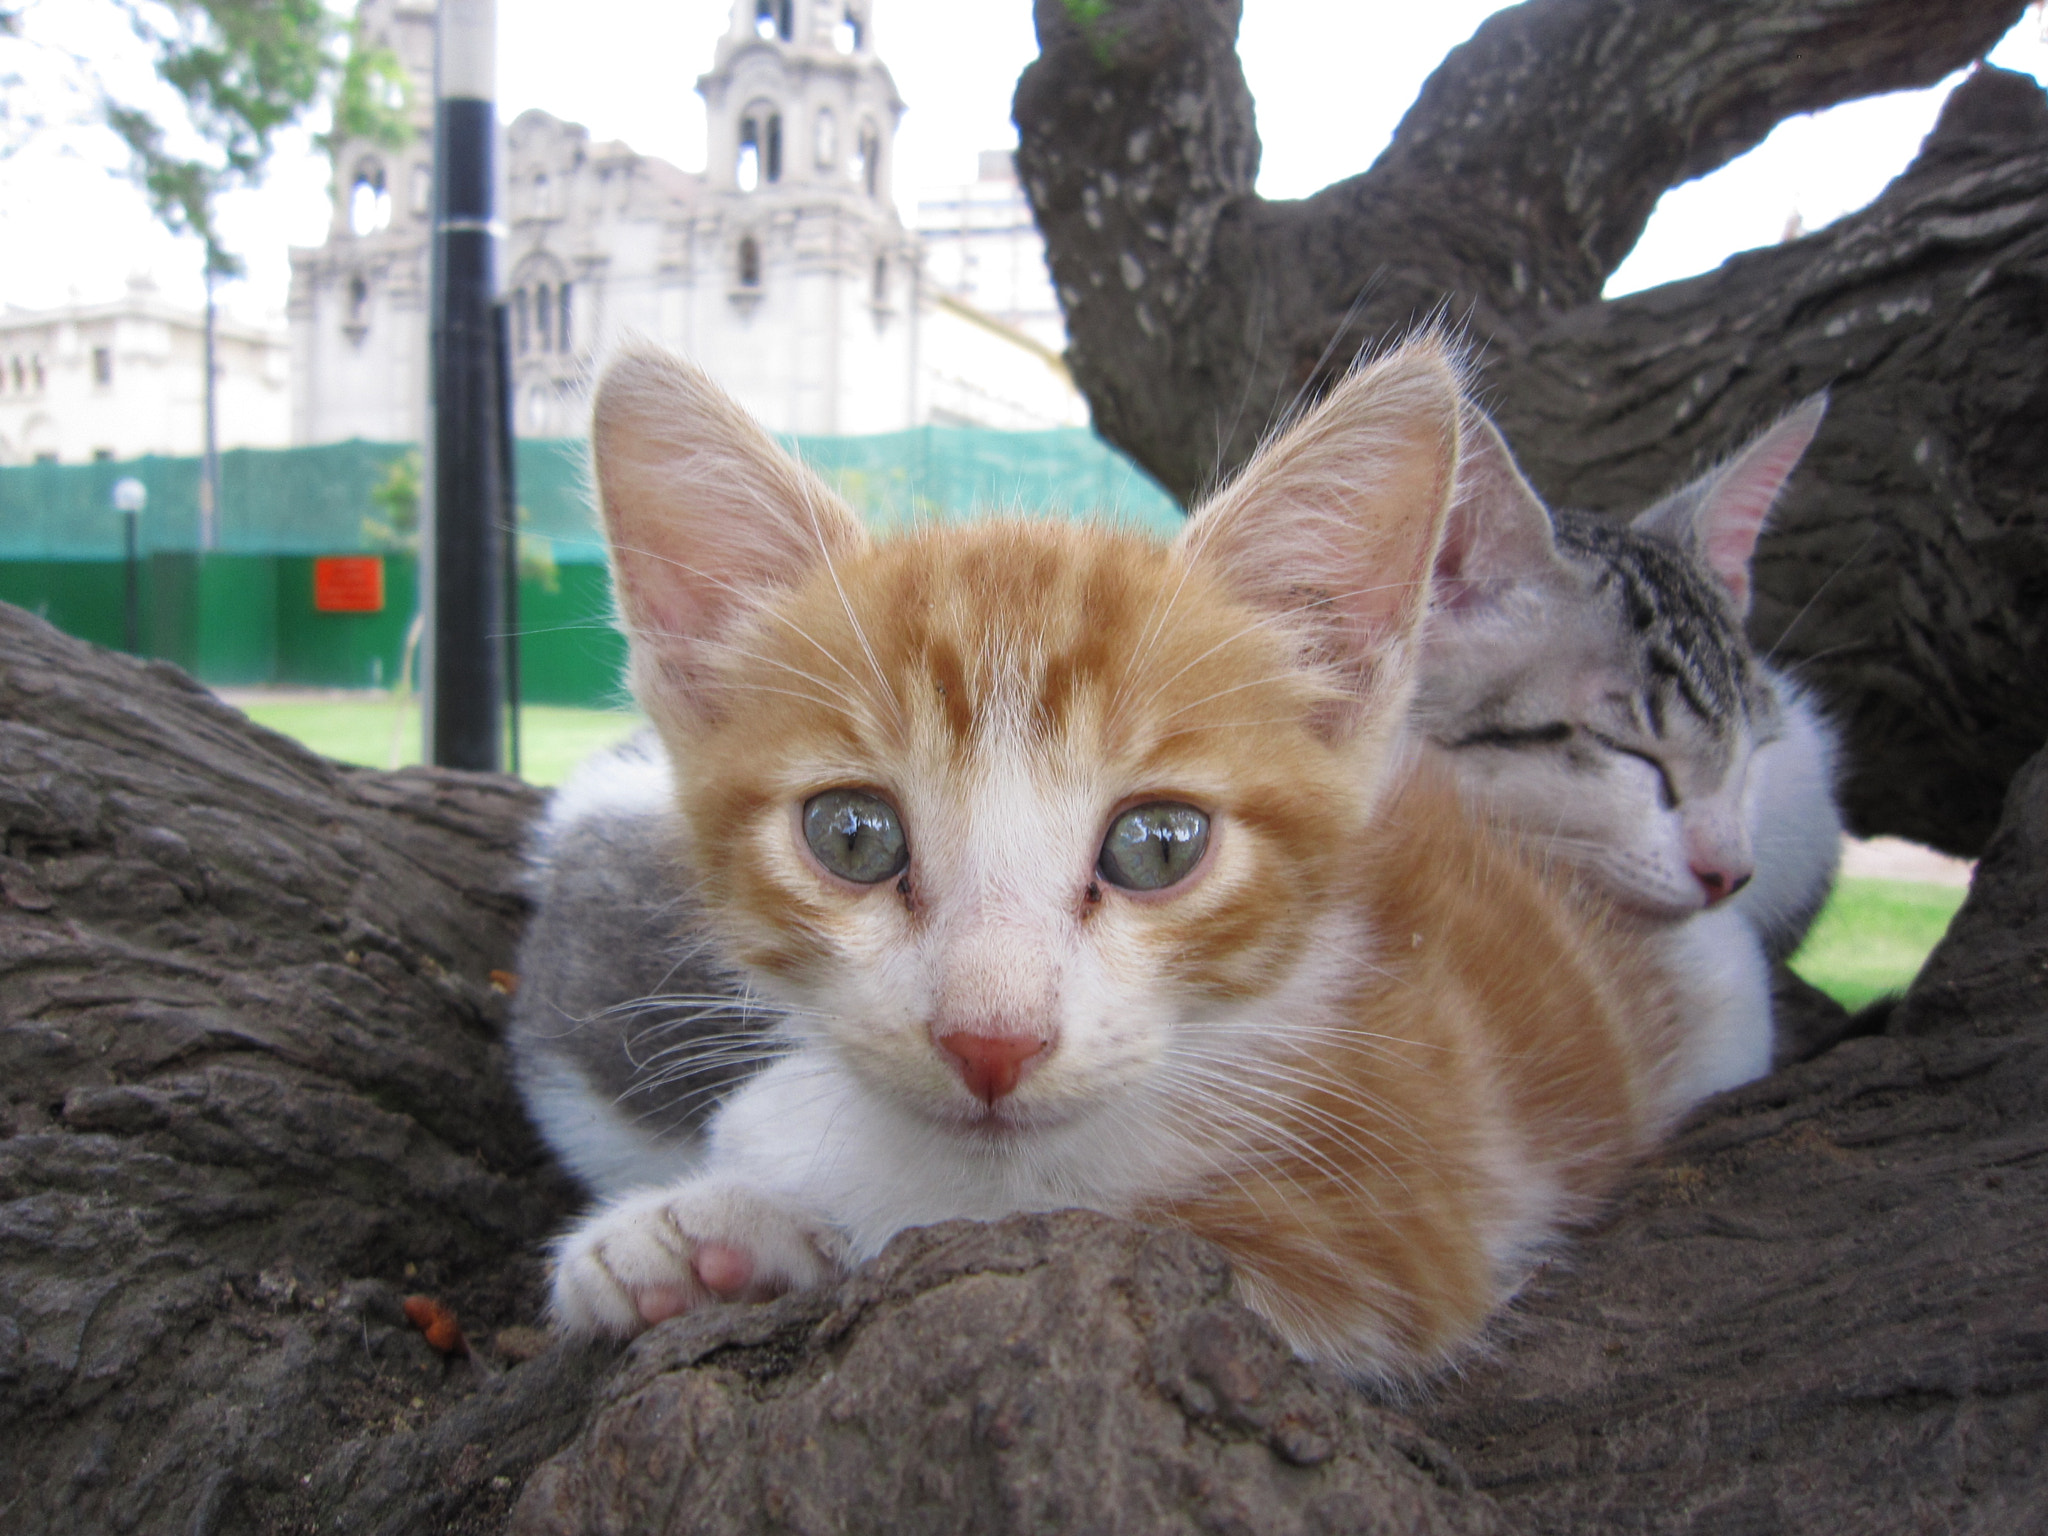 Canon PowerShot SD980 IS (Digital IXUS 200 IS / IXY Digital 930 IS) sample photo. Kittens of spring photography